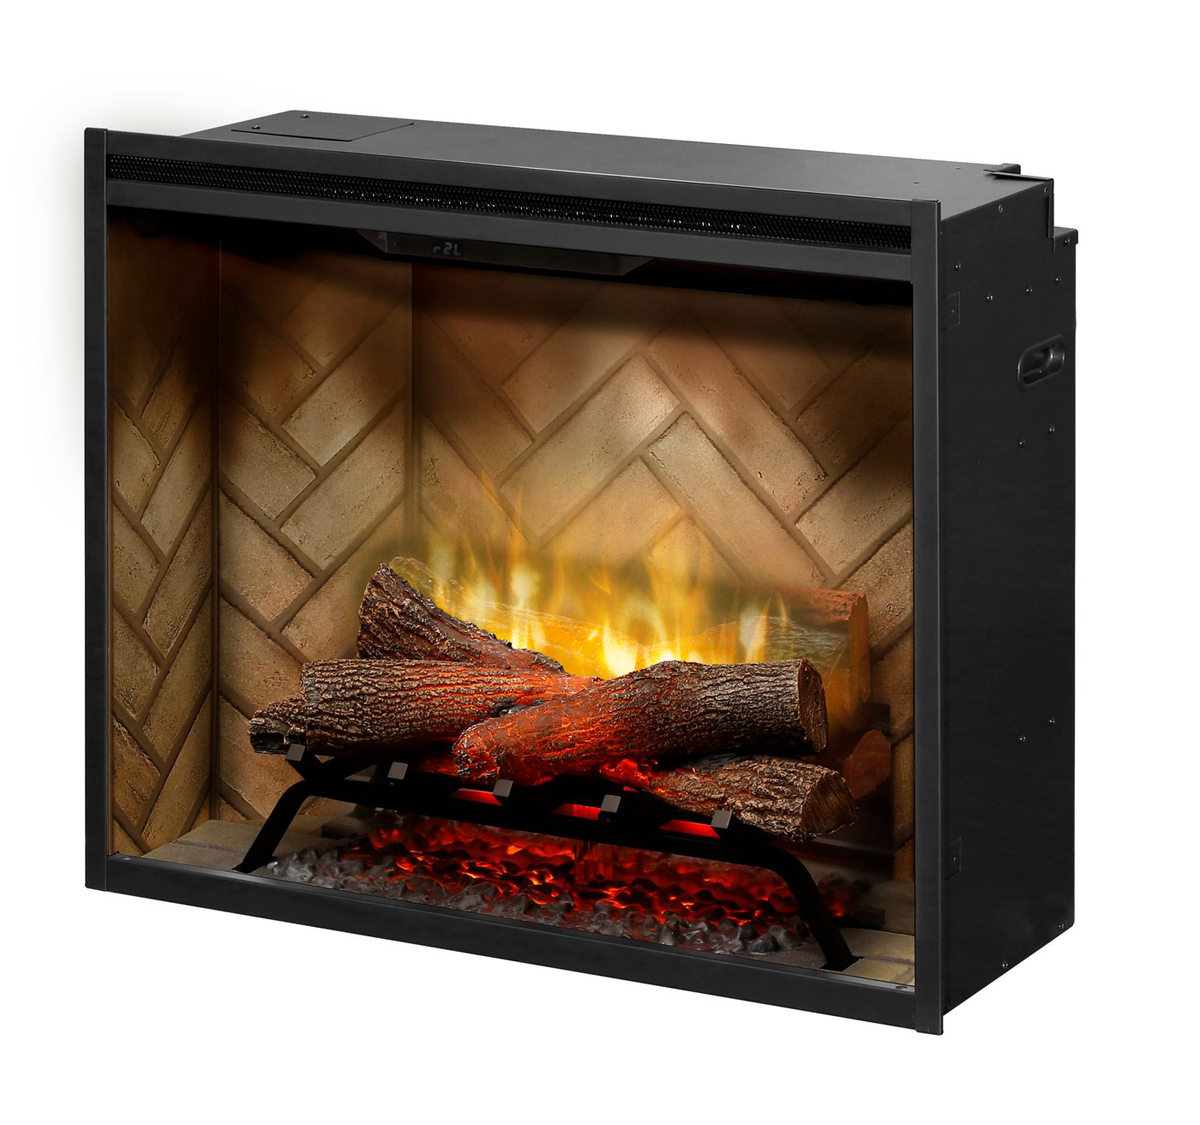 revillusion 30″””””””” built-in electic firebox/fireplace insert with herringbone brick interior product image